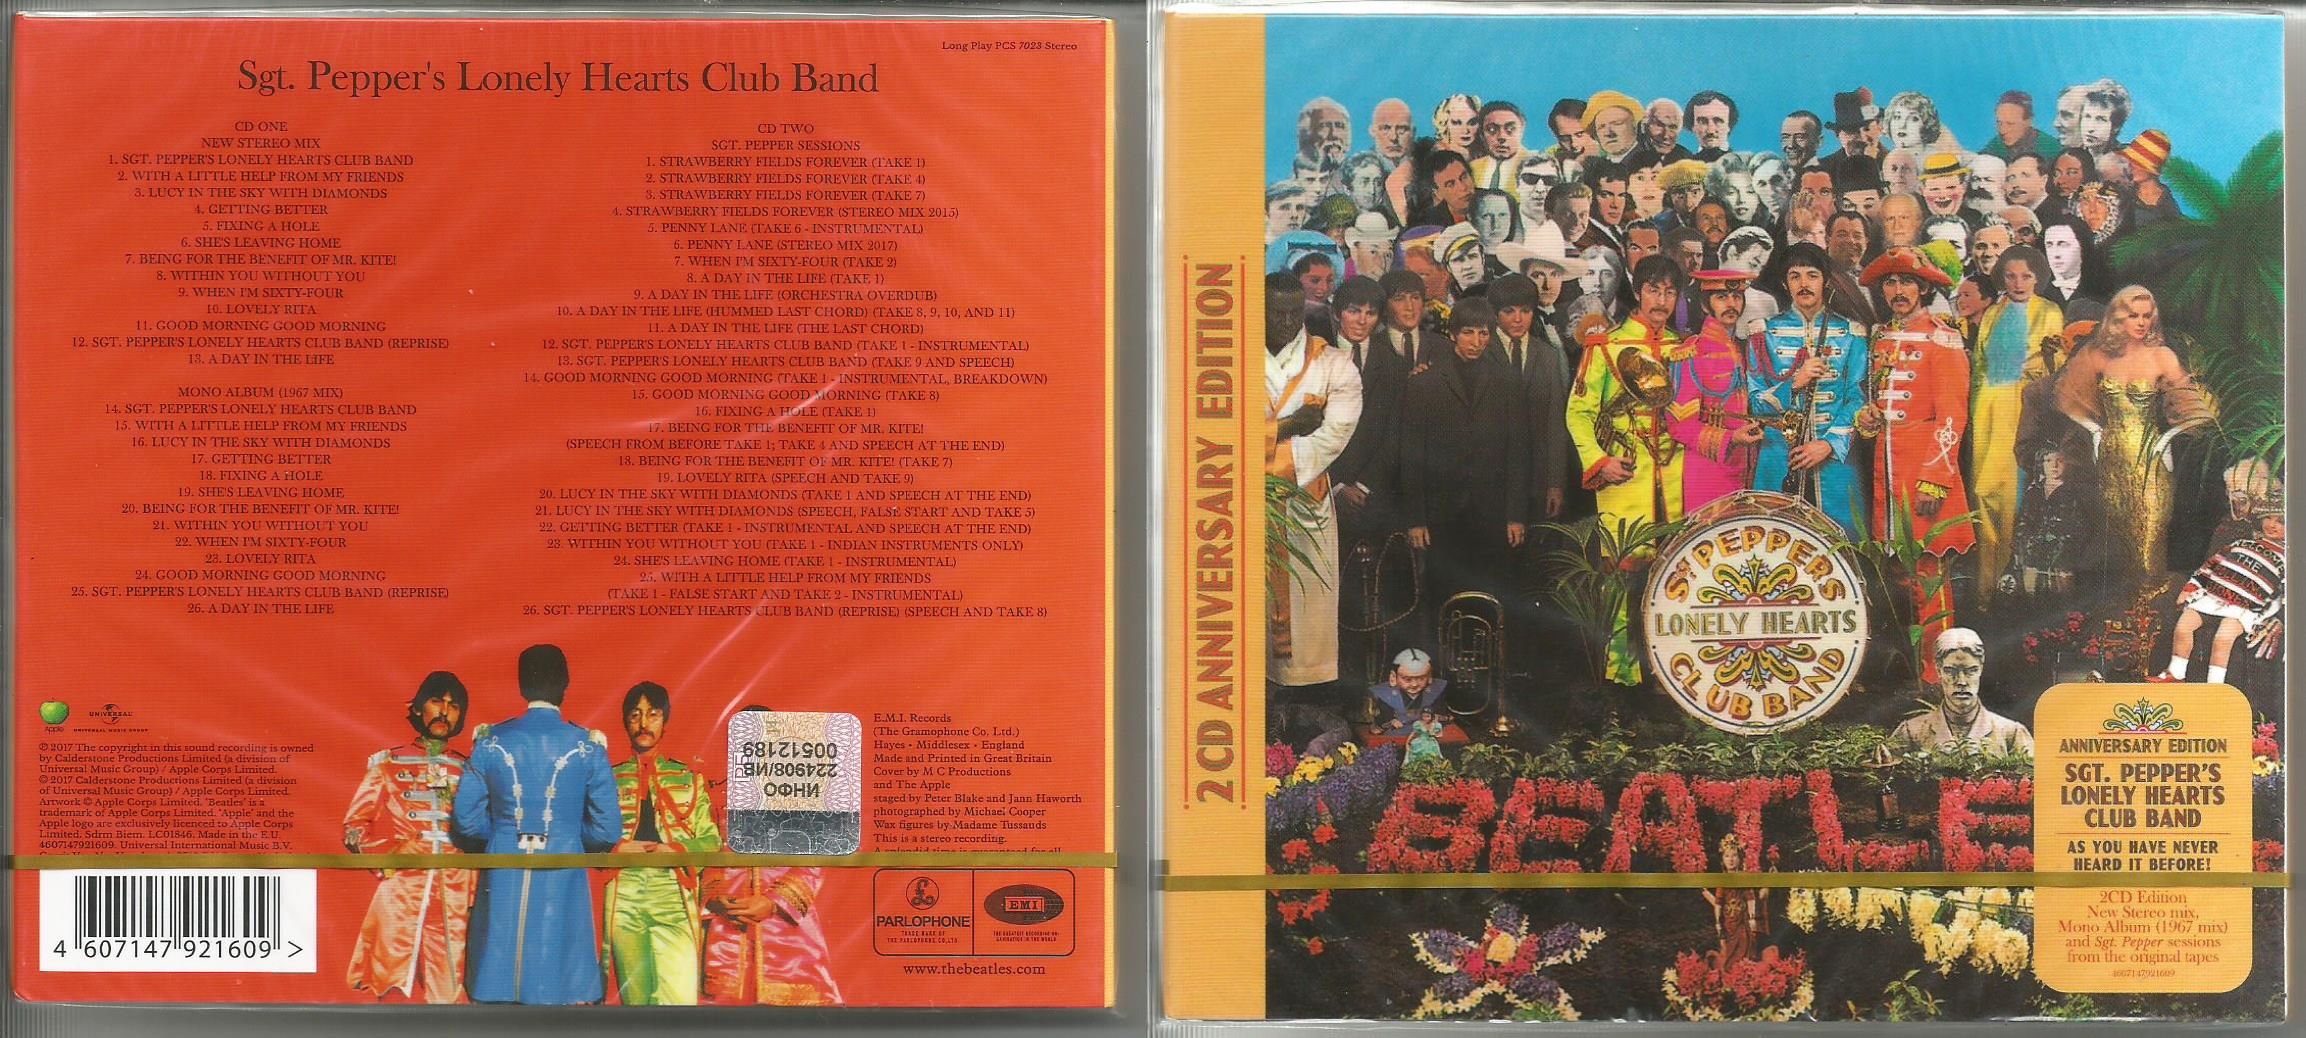 Mp3 pepper. The Beatles Sgt. Pepper's Lonely Hearts Club Band 1967. Beatles Sgt Pepper's Lonely Hearts Club Band CD. Sgt Pepper's Lonely Hearts Club Band обложка. Обложке пластинки Sgt. Pepper's Lonely Hearts Club Band (1967 г.)..